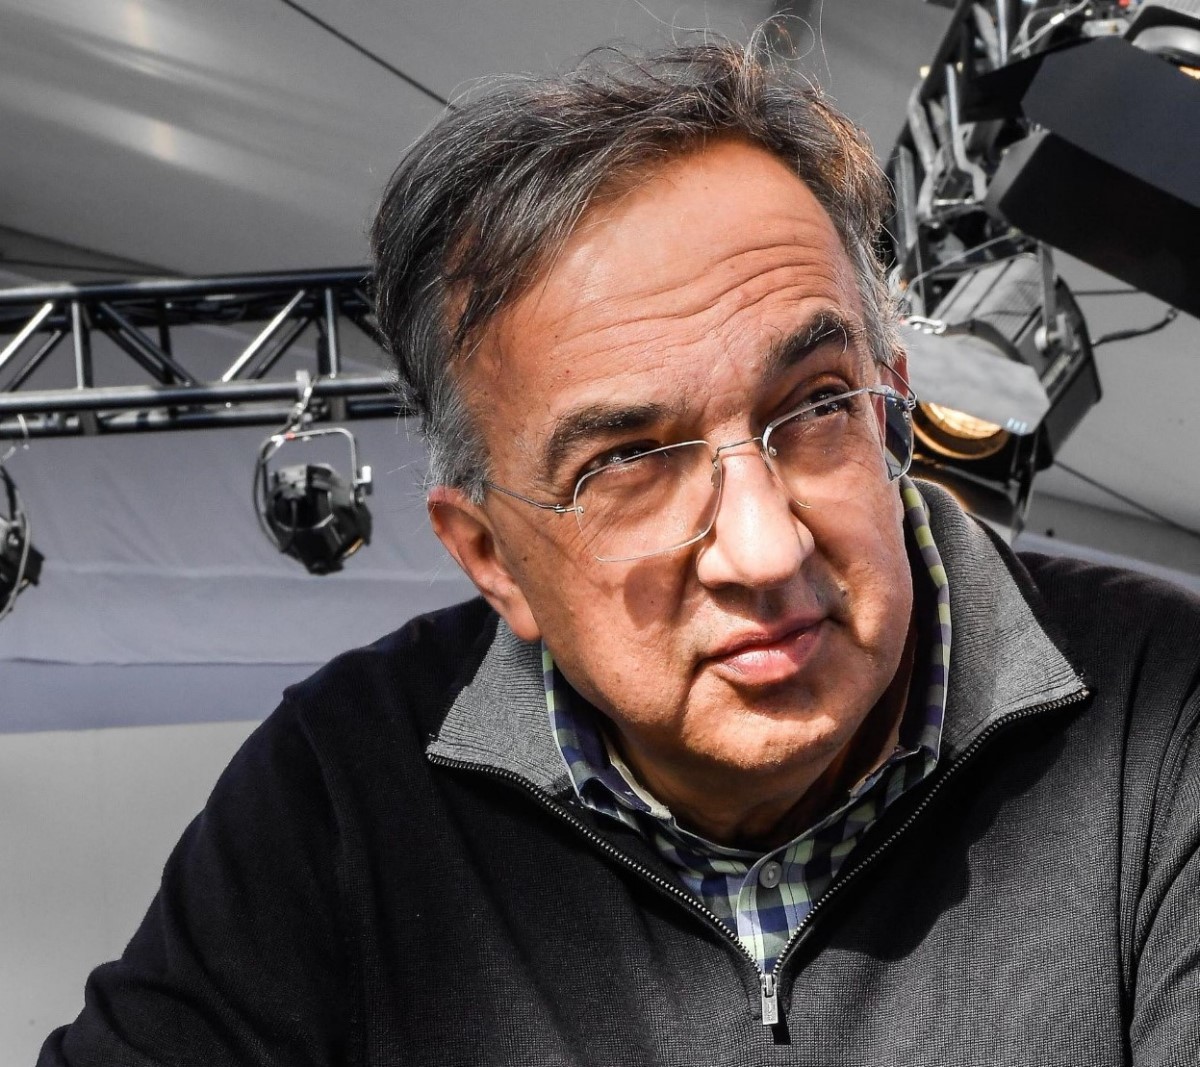 Marchionne - if you cannot beat them, join them